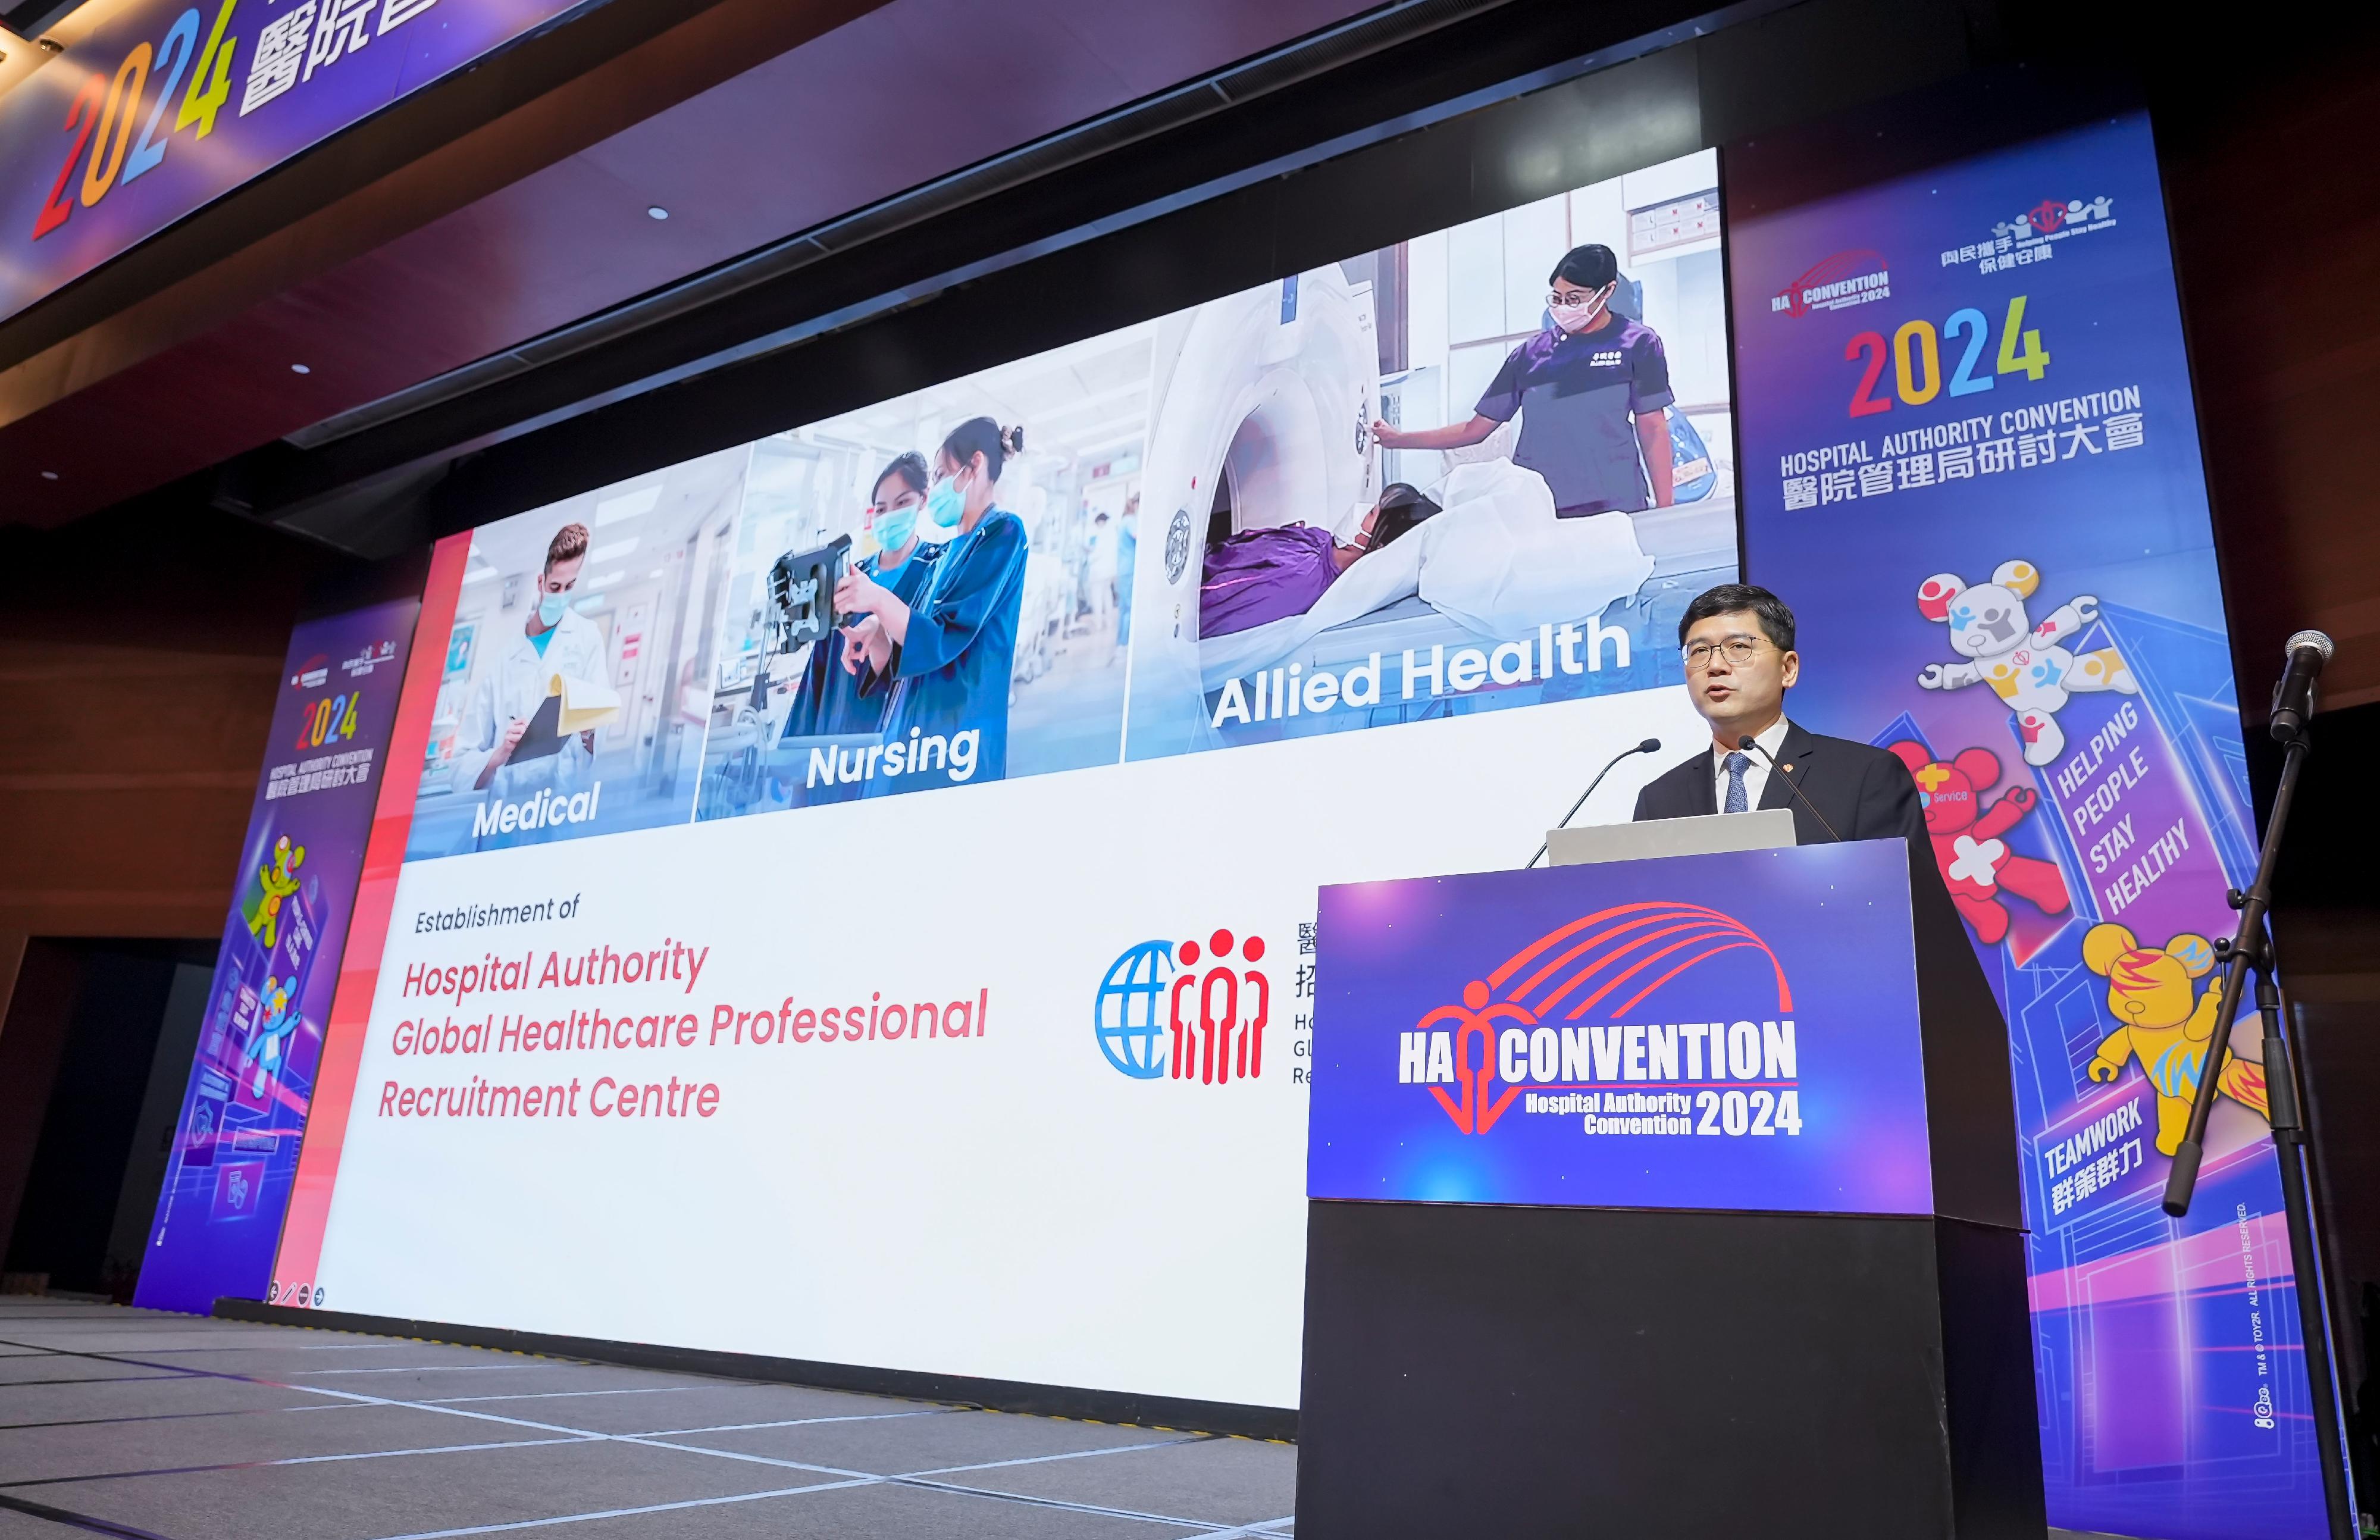 The Hospital Authority (HA) Convention 2023 is being held in both physical and virtual formats today and tomorrow (May 16 and 17). Photo shows the HA Chief Executive, Dr Tony Ko, delivering his keynote address at the opening ceremony of the Convention.